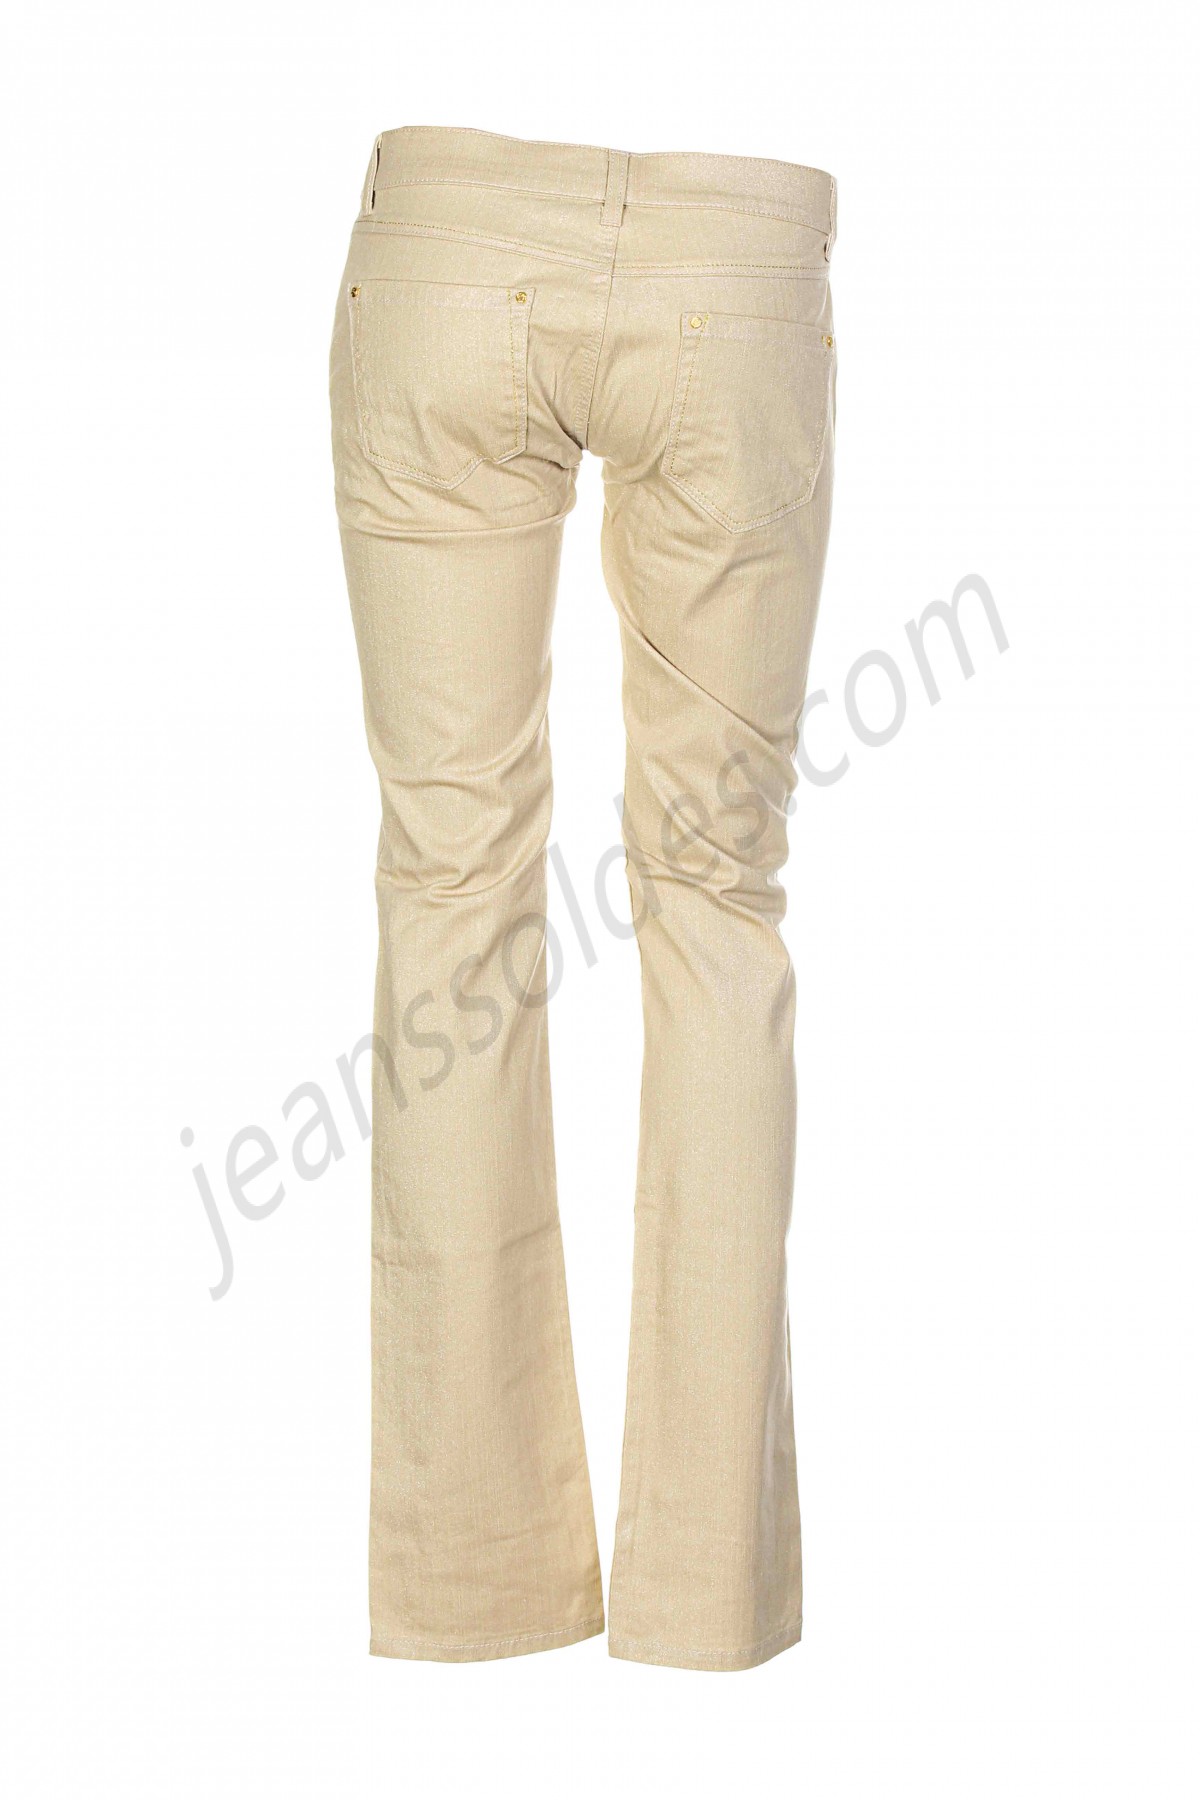 n&vy-Jeans coupe slim prix d’amis - -1